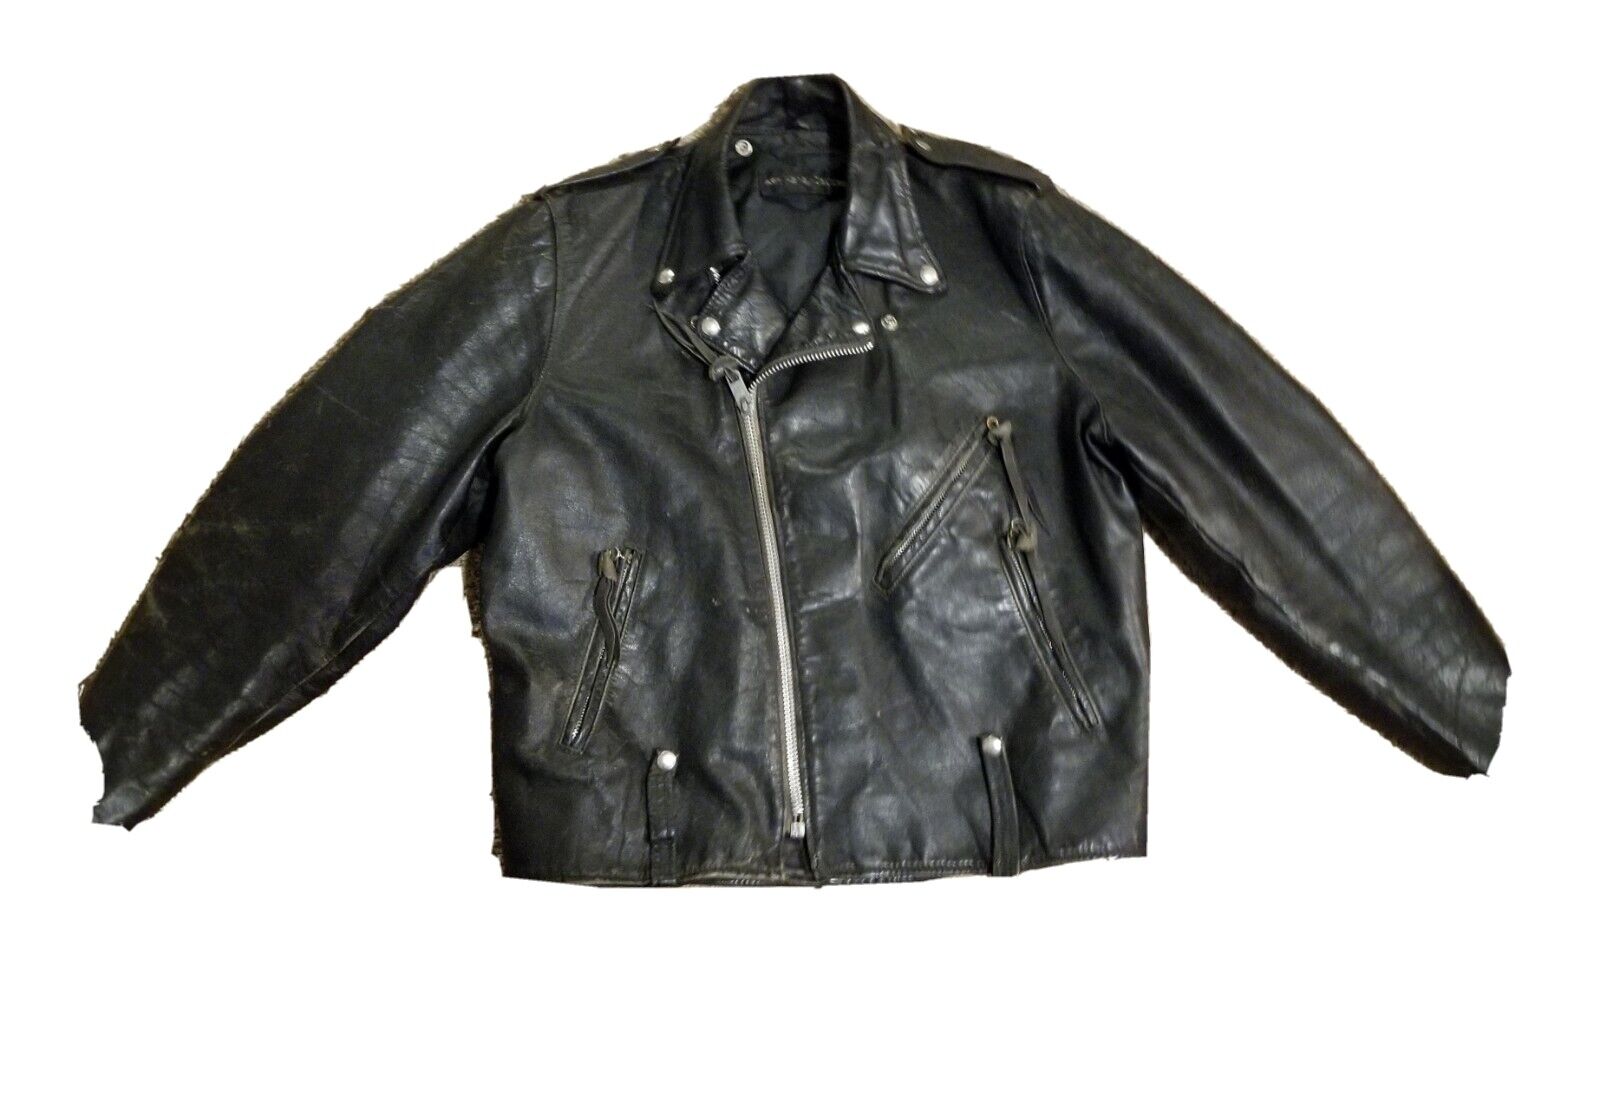 HARLEY-DAVIDSON BLACK LEATHER MOTORCYCLE JACKET-HEAVY WEIGHT CLASSIC VINTAGE 